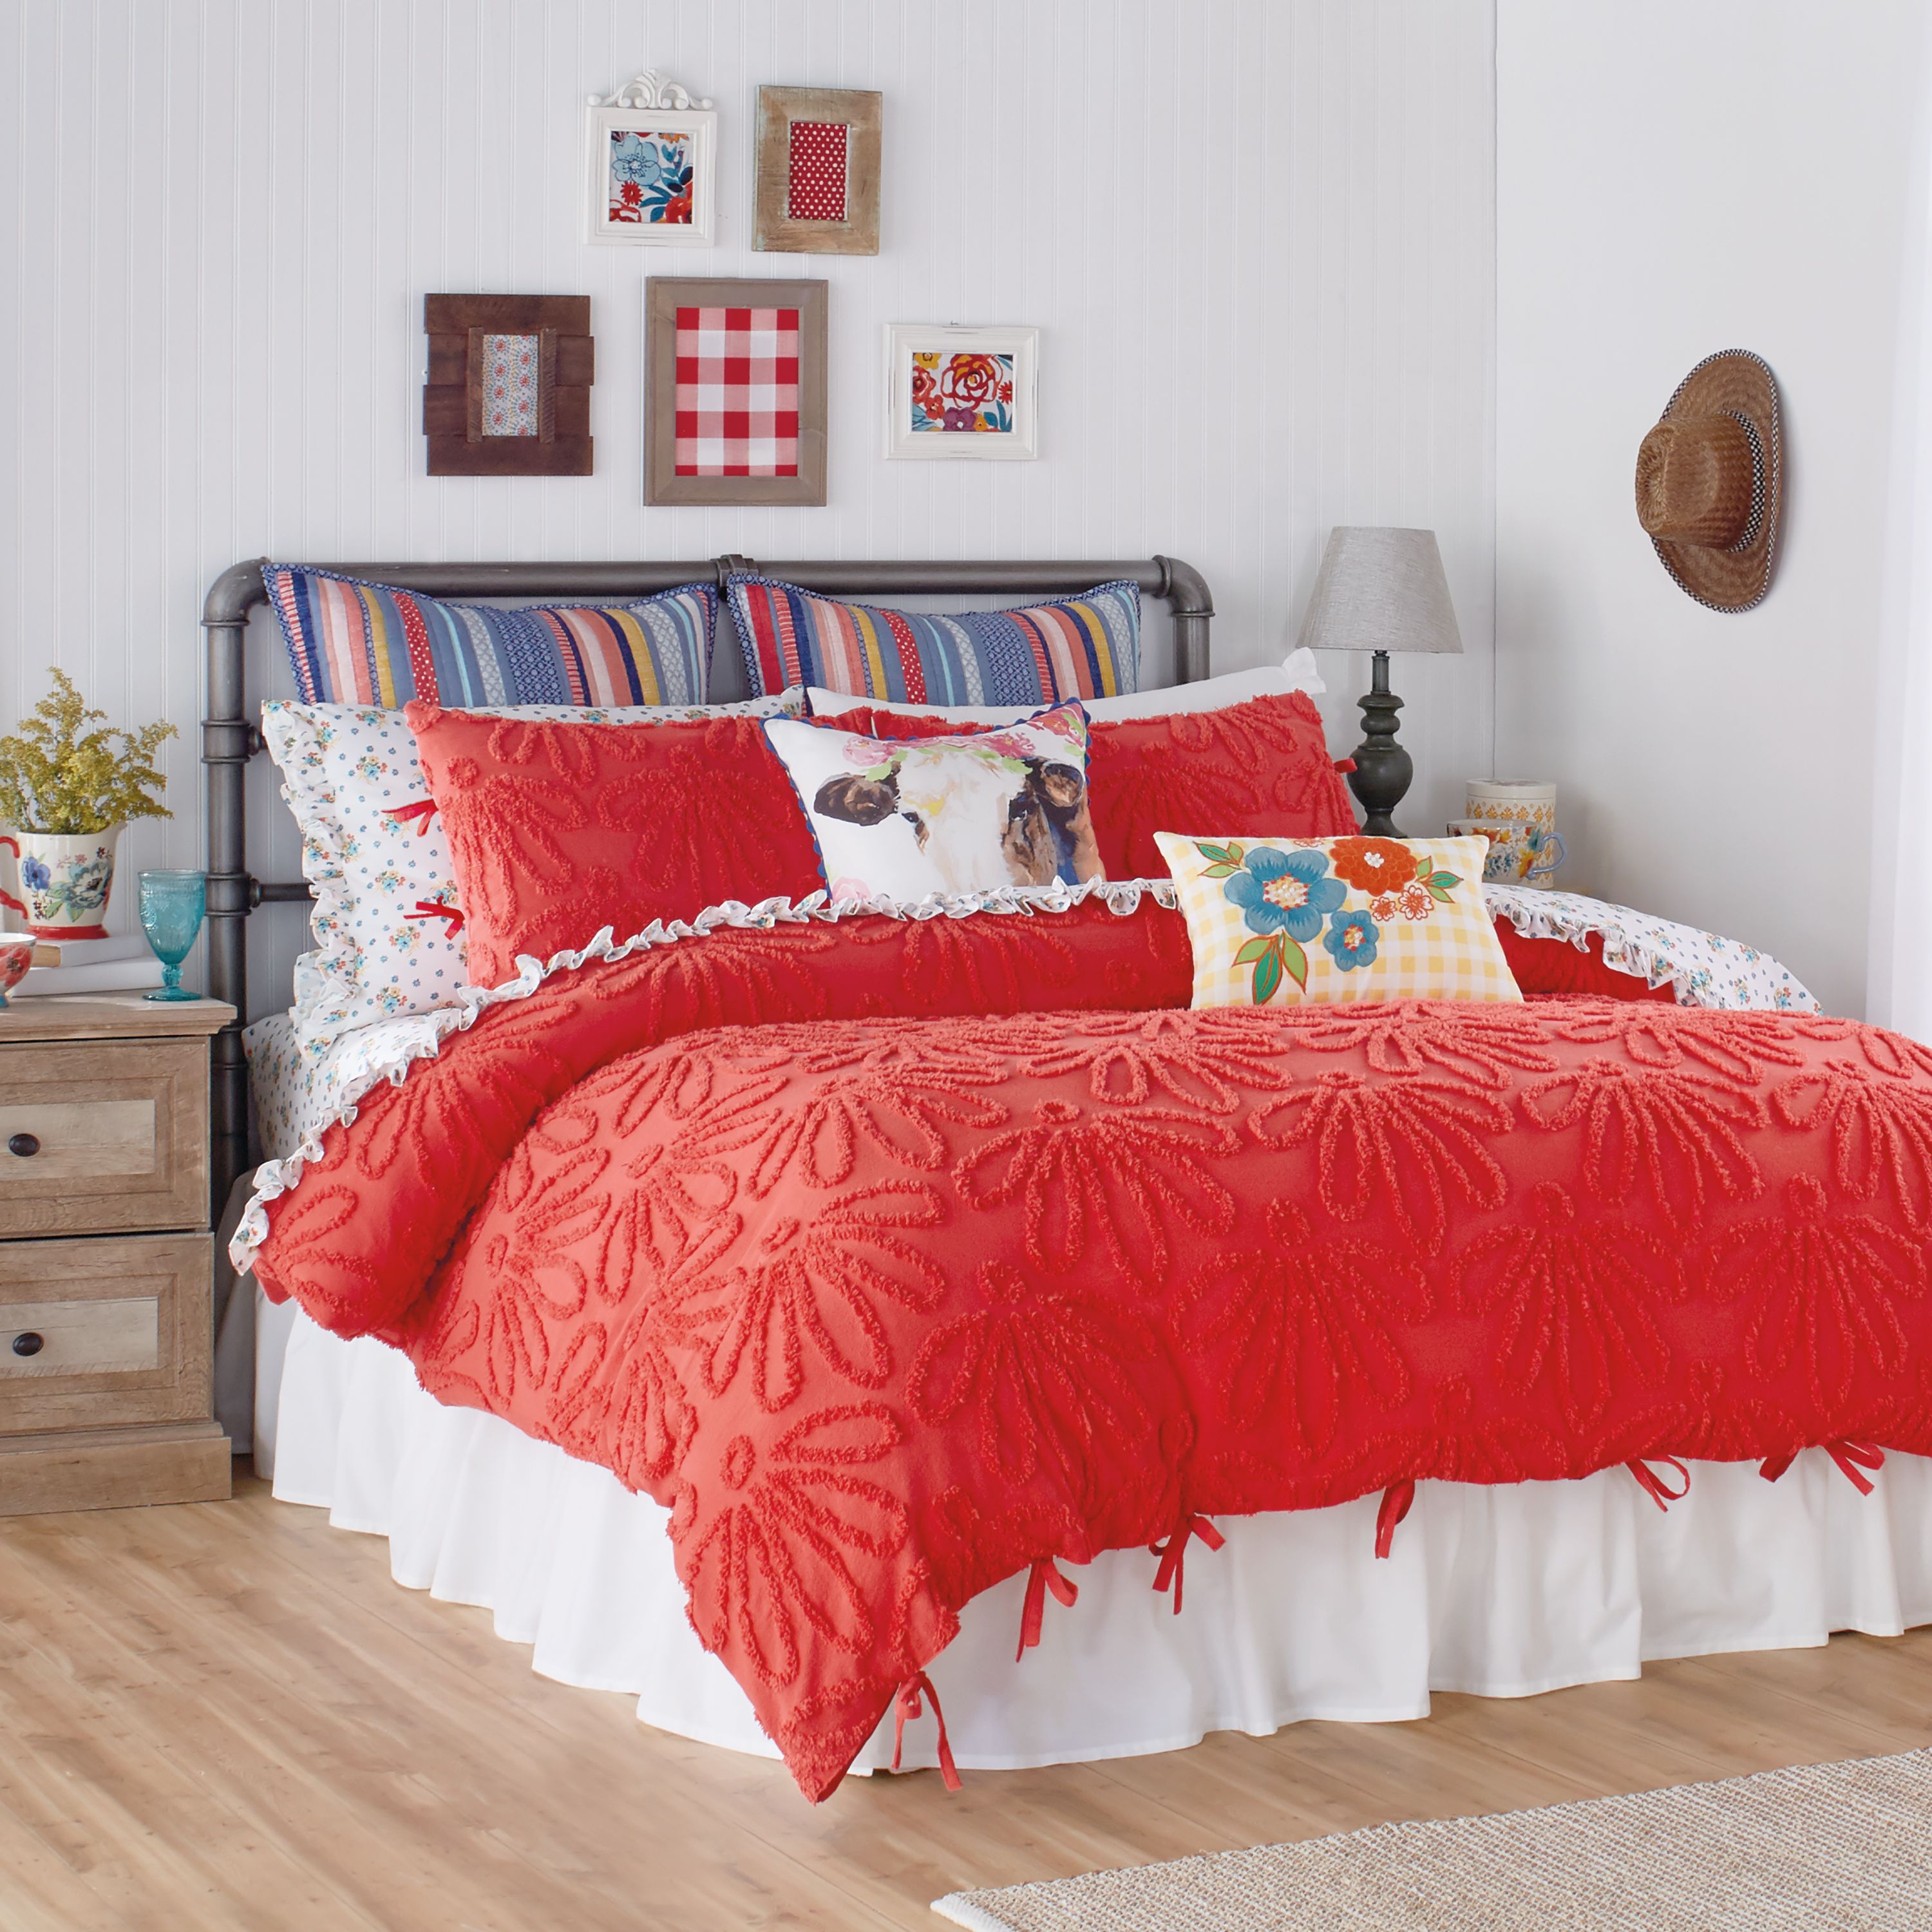 See 'Pioneer Woman' Star Ree Drummond's New Fall Bedding ...